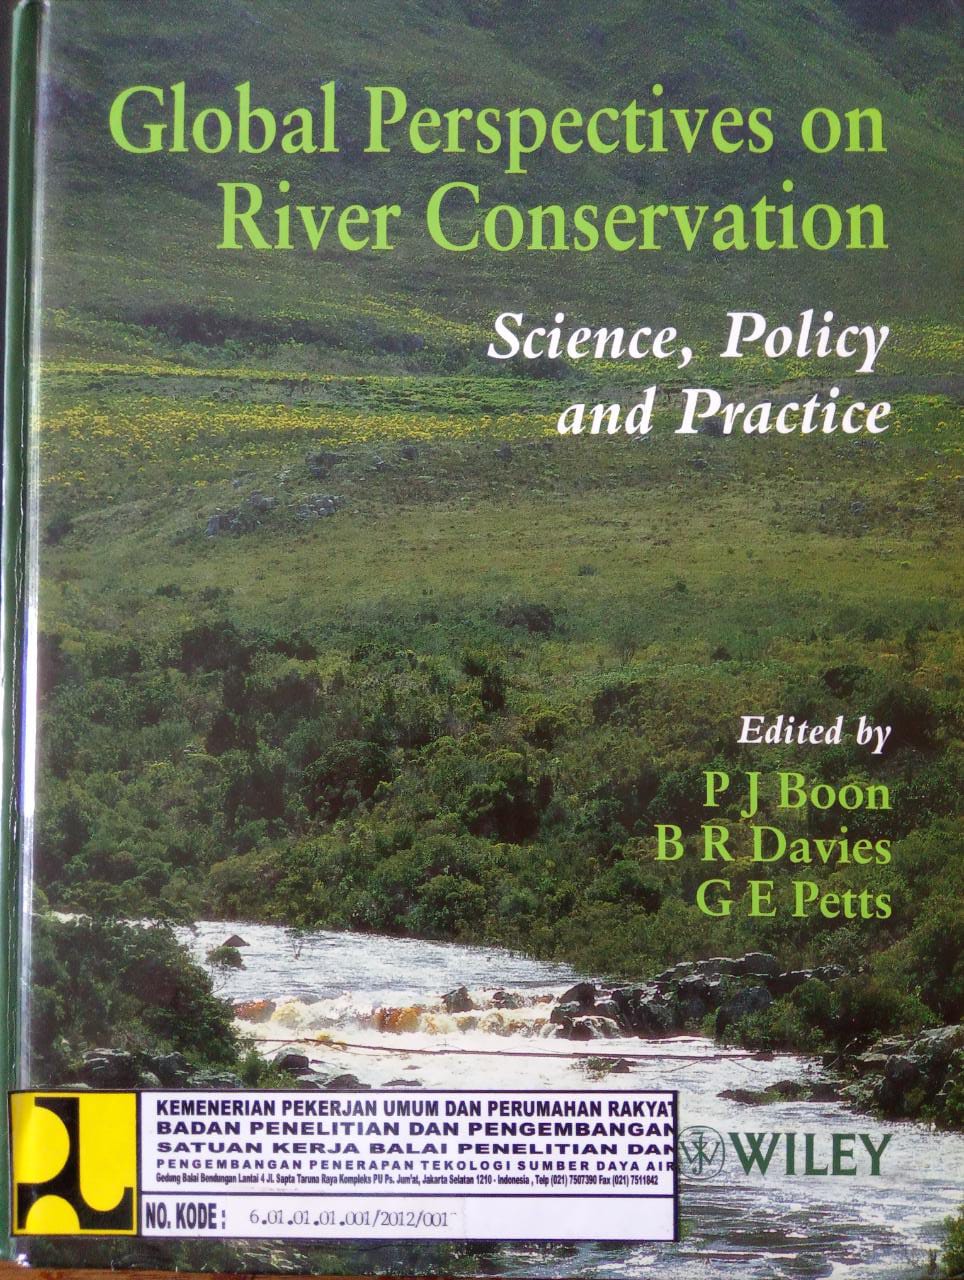 GLOBAL PERSPECTIVES ON RIVER CONSERVATION